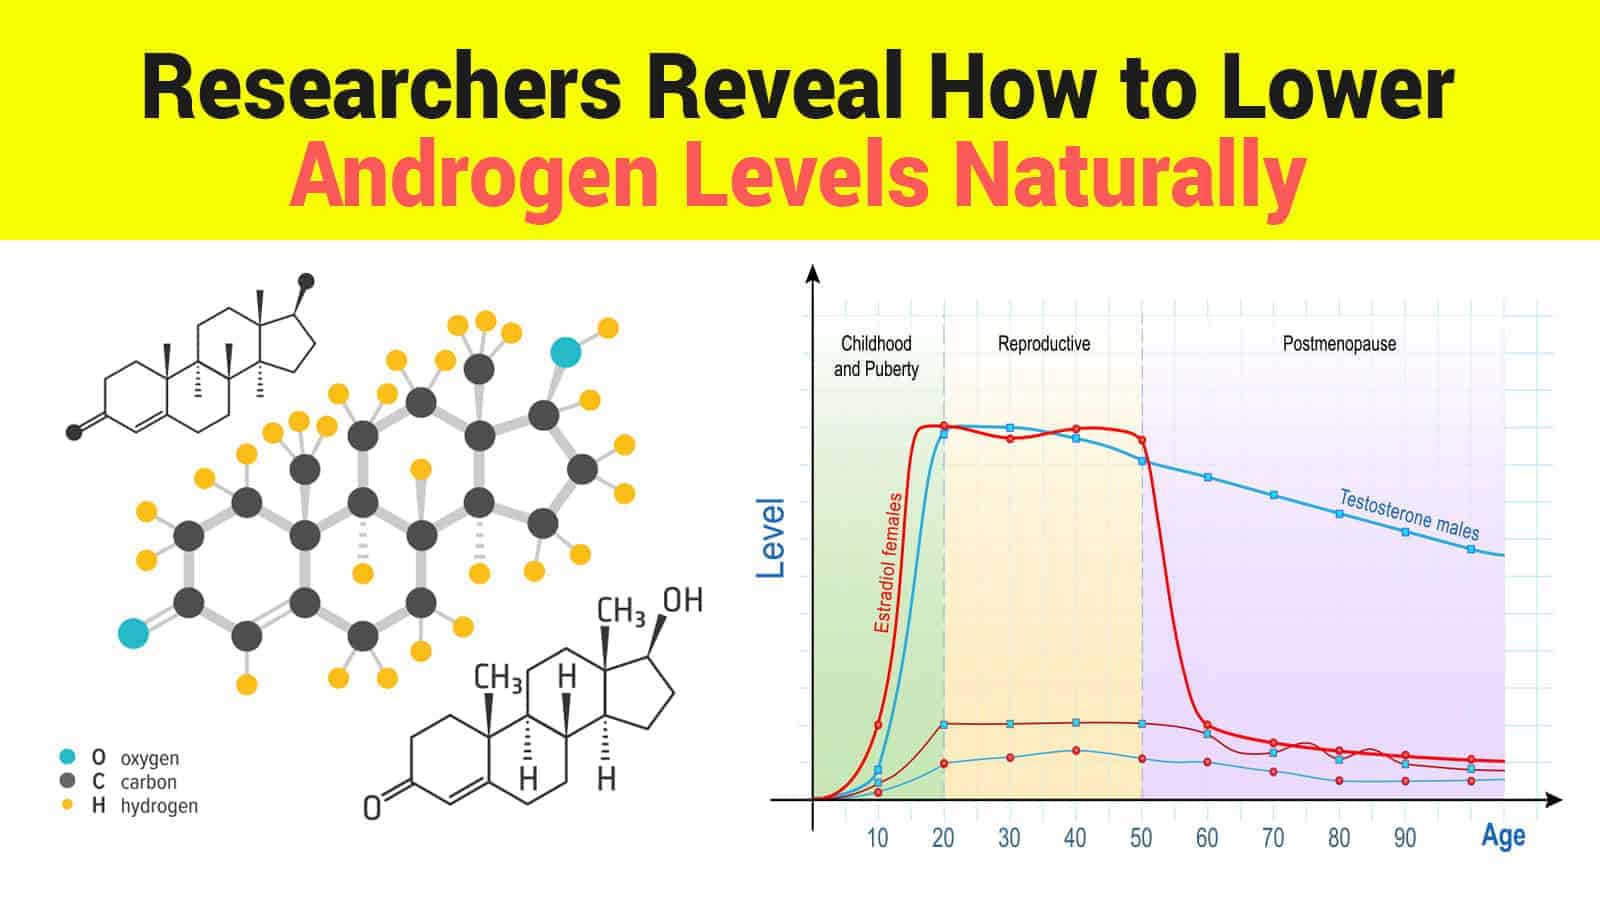 Researchers Reveal How to Lower Androgen Levels Naturally